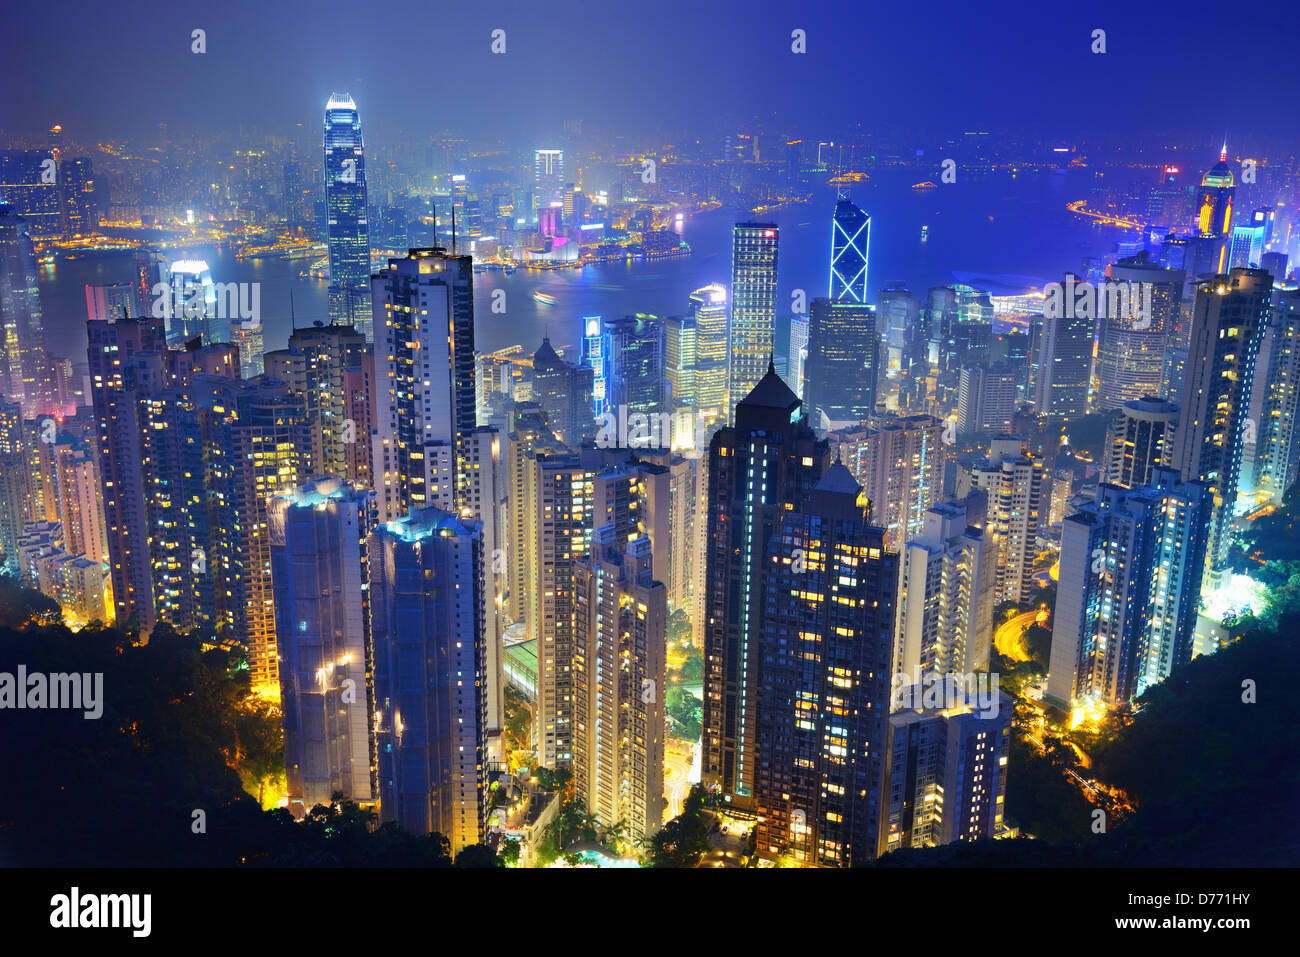 Famed skyline of Hong Kong from Victoria Peak Stock Photo